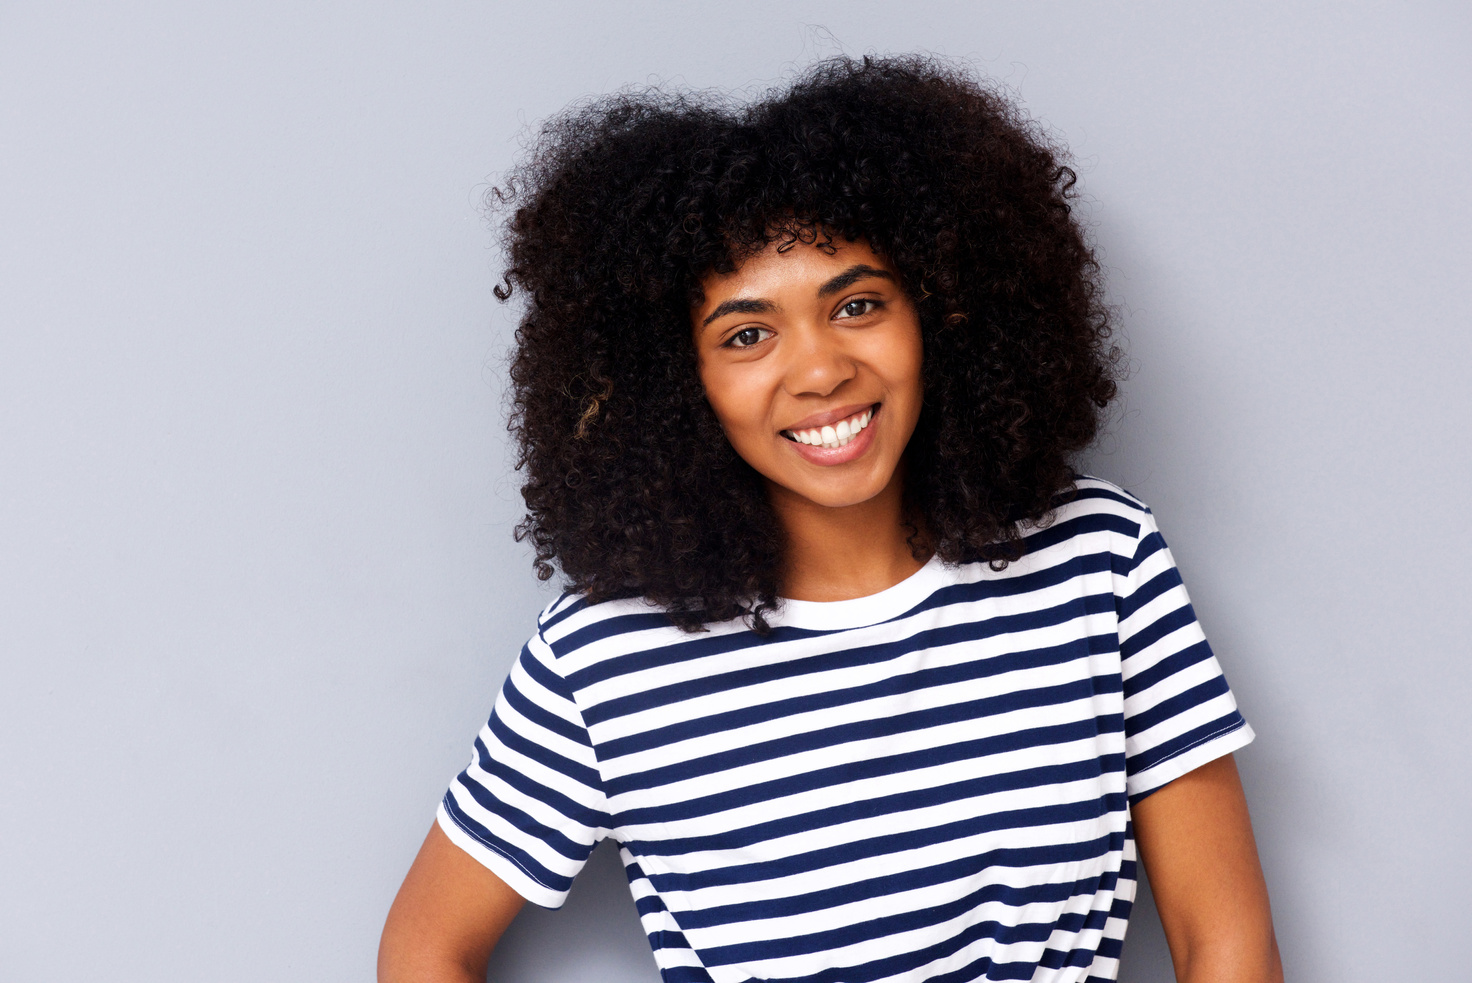 Smiling Woman with Afro Hair Wearing Striped Shirt